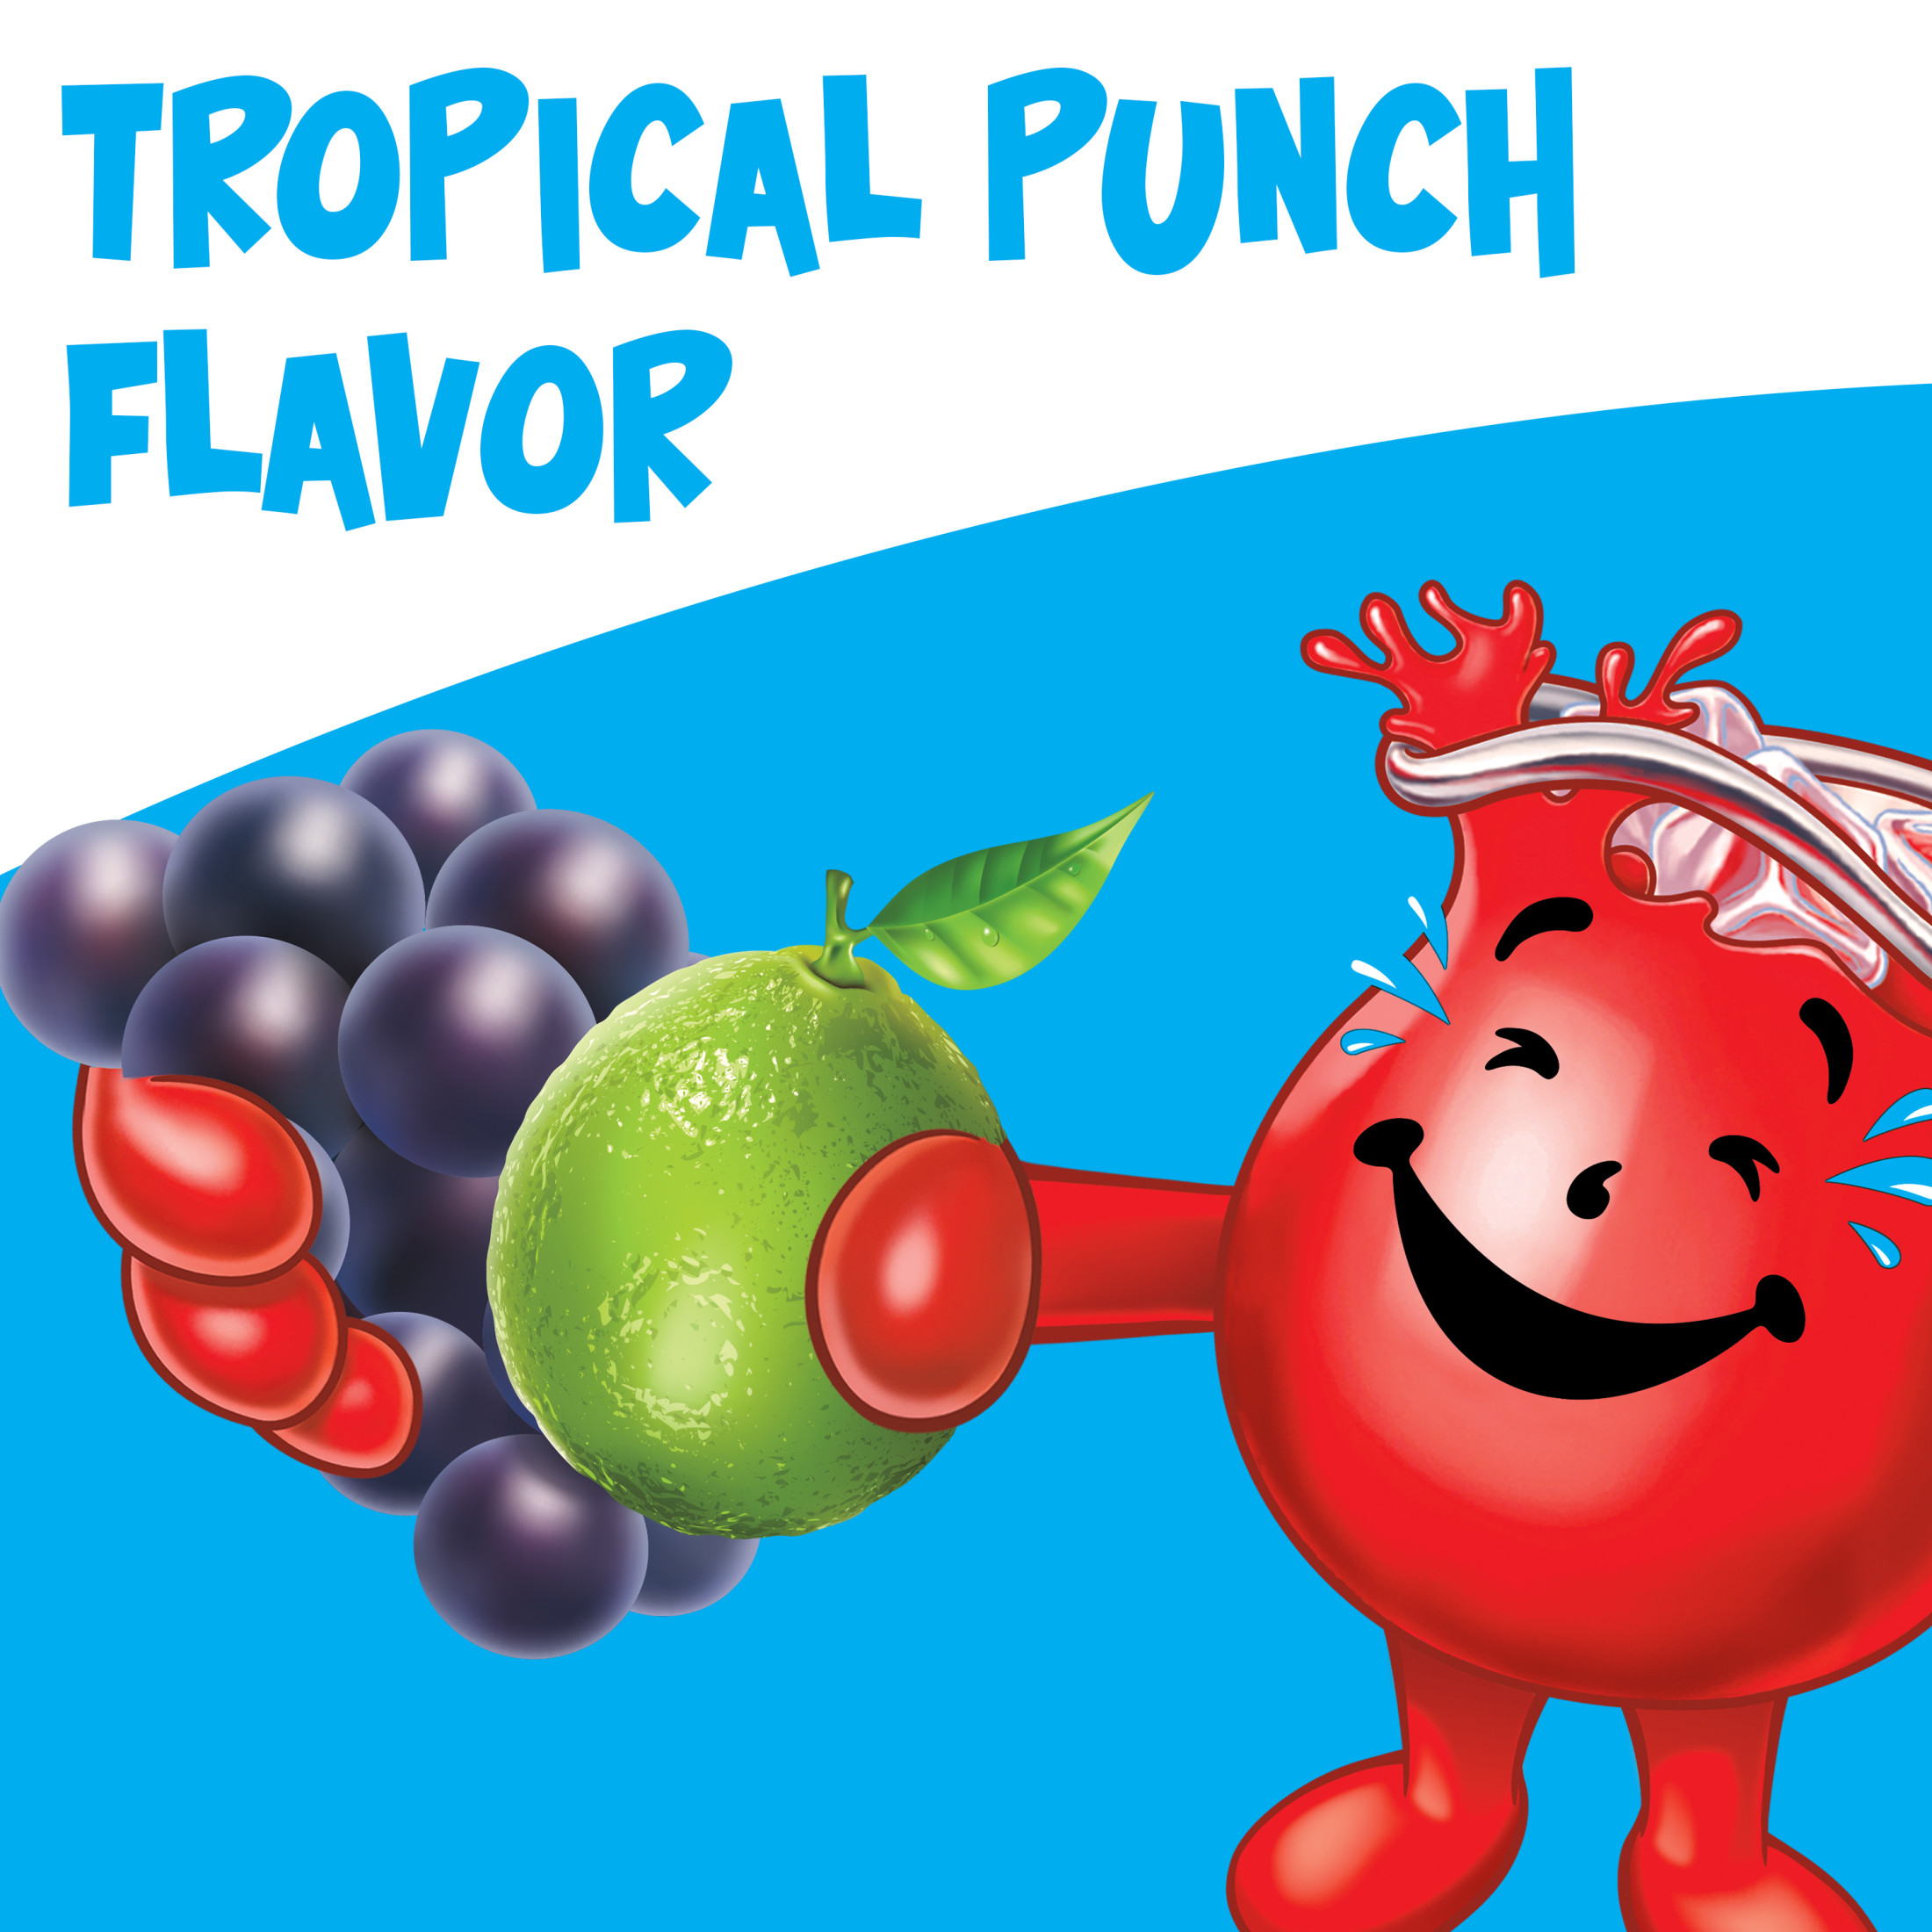 Kool-Aid Sugar Sweetened Tropical Punch Artificially Flavored Powdered Drink Mix, 19 oz. Canister - image 4 of 11